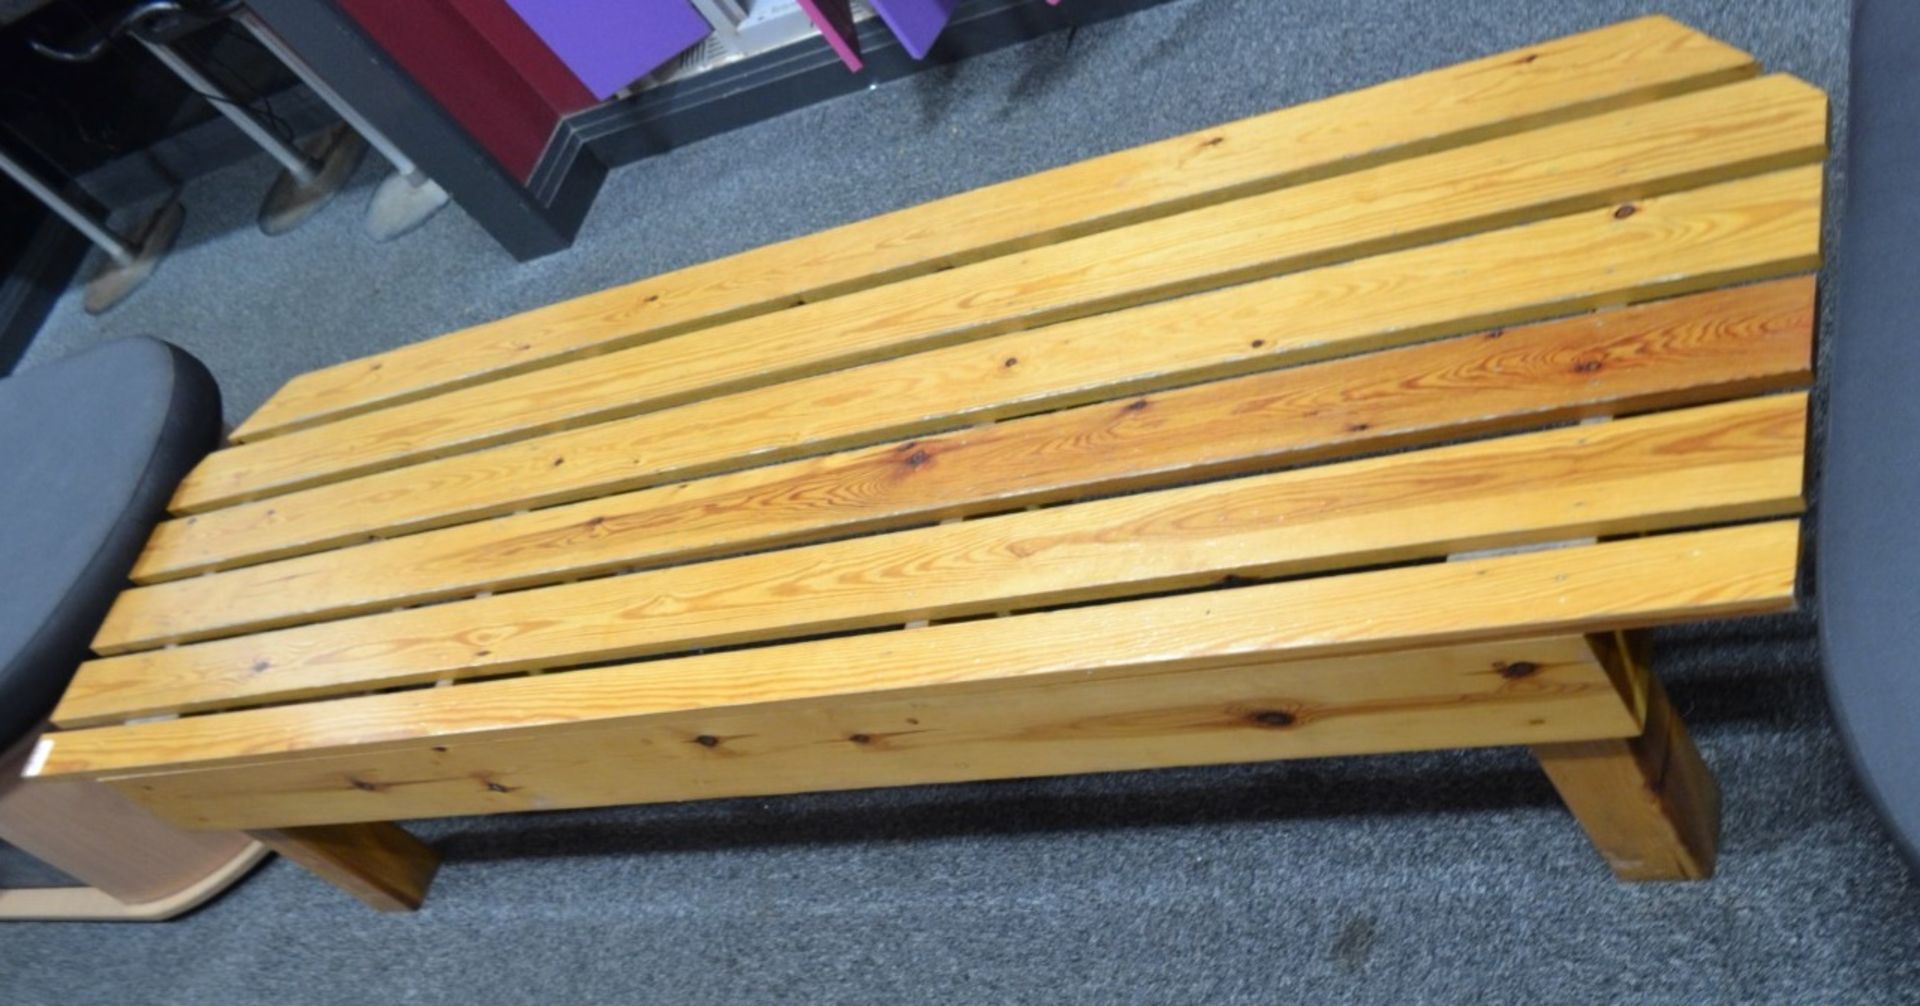 1 x Wooden Rectangular Changing Room Bench - Dimensions: L205 x W65 x H45cm - Ref: J2130/MCR - CL356 - Image 2 of 3